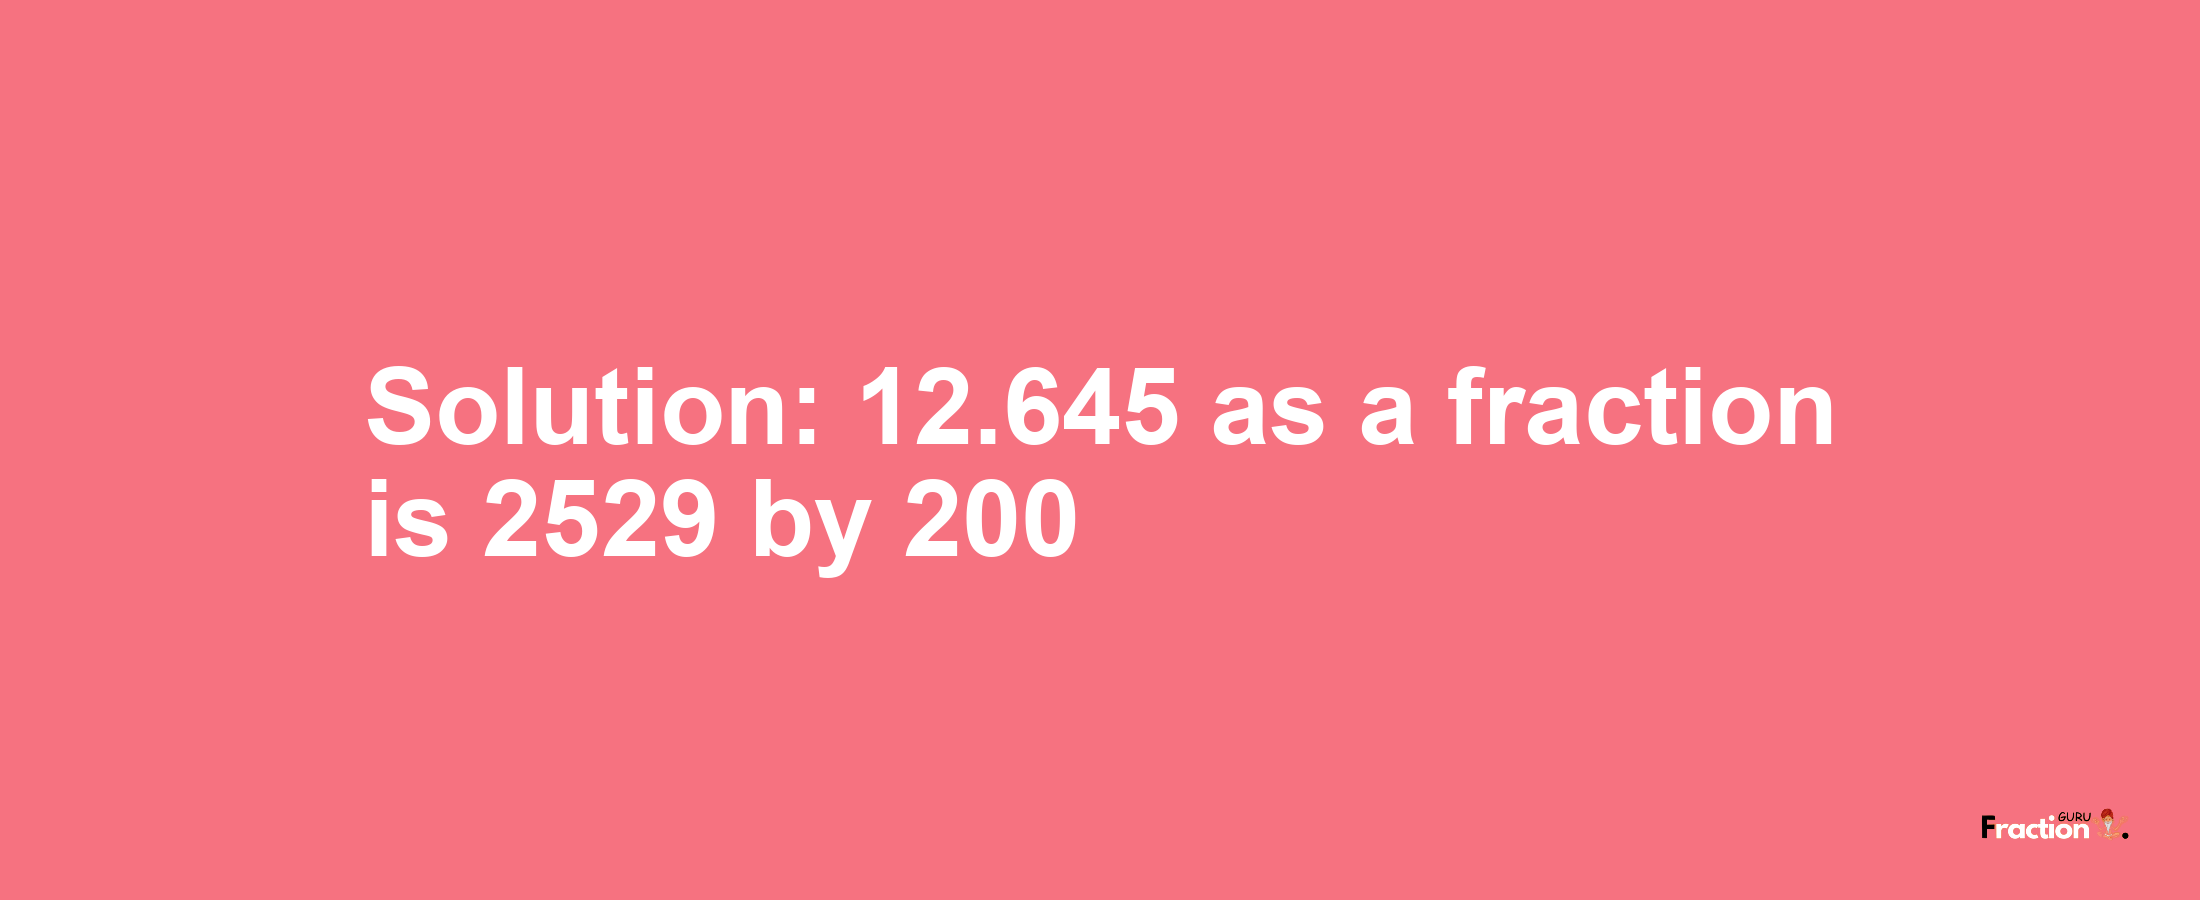 Solution:12.645 as a fraction is 2529/200